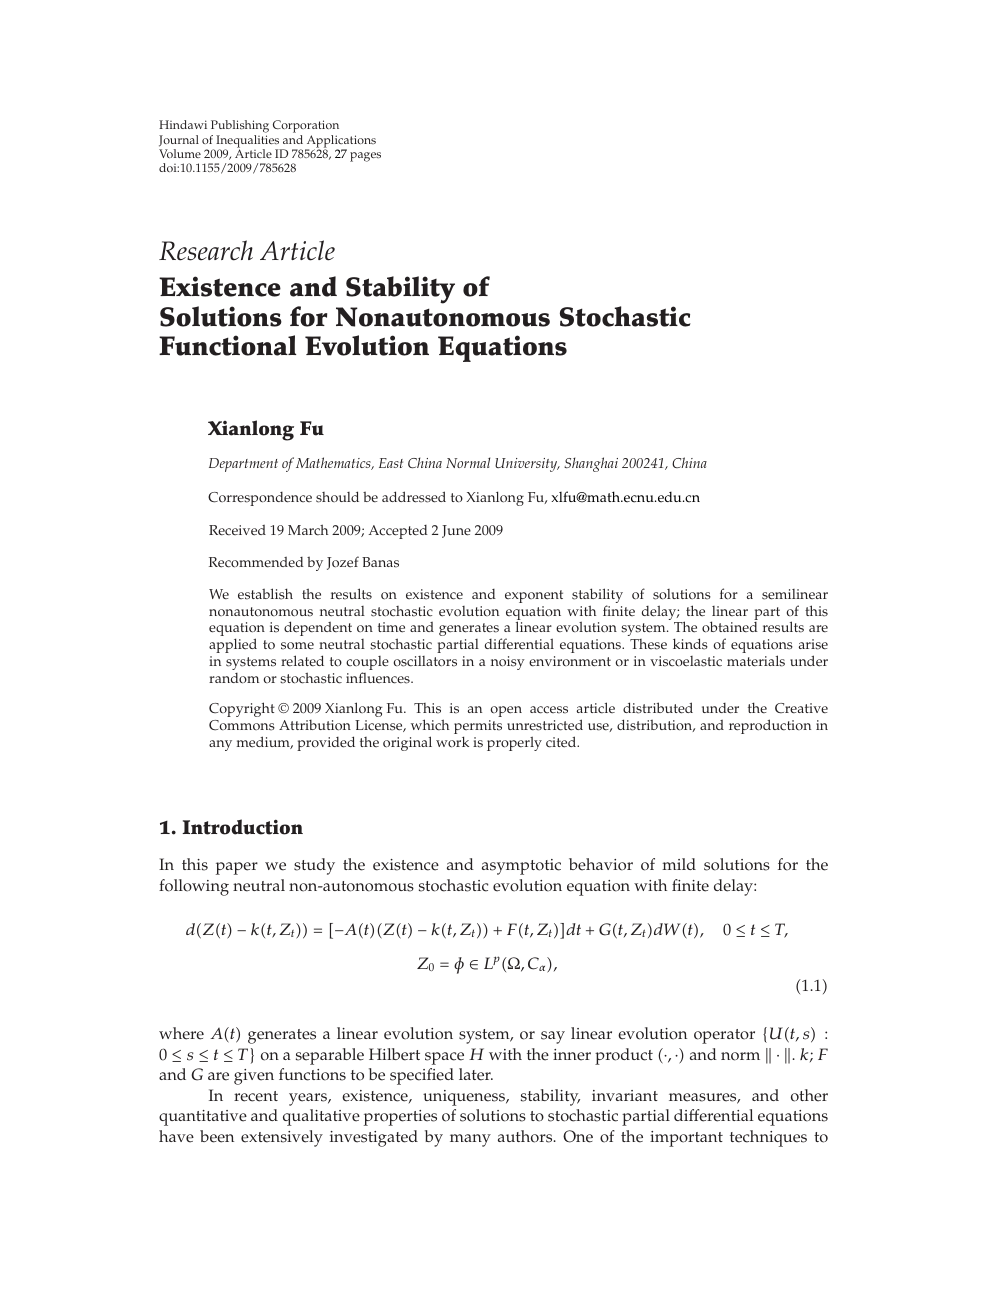 Existence And Stability Of Solutions For Nonautonomous Stochastic Functional Evolution Equations Topic Of Research Paper In Mathematics Download Scholarly Article Pdf And Read For Free On Cyberleninka Open Science Hub